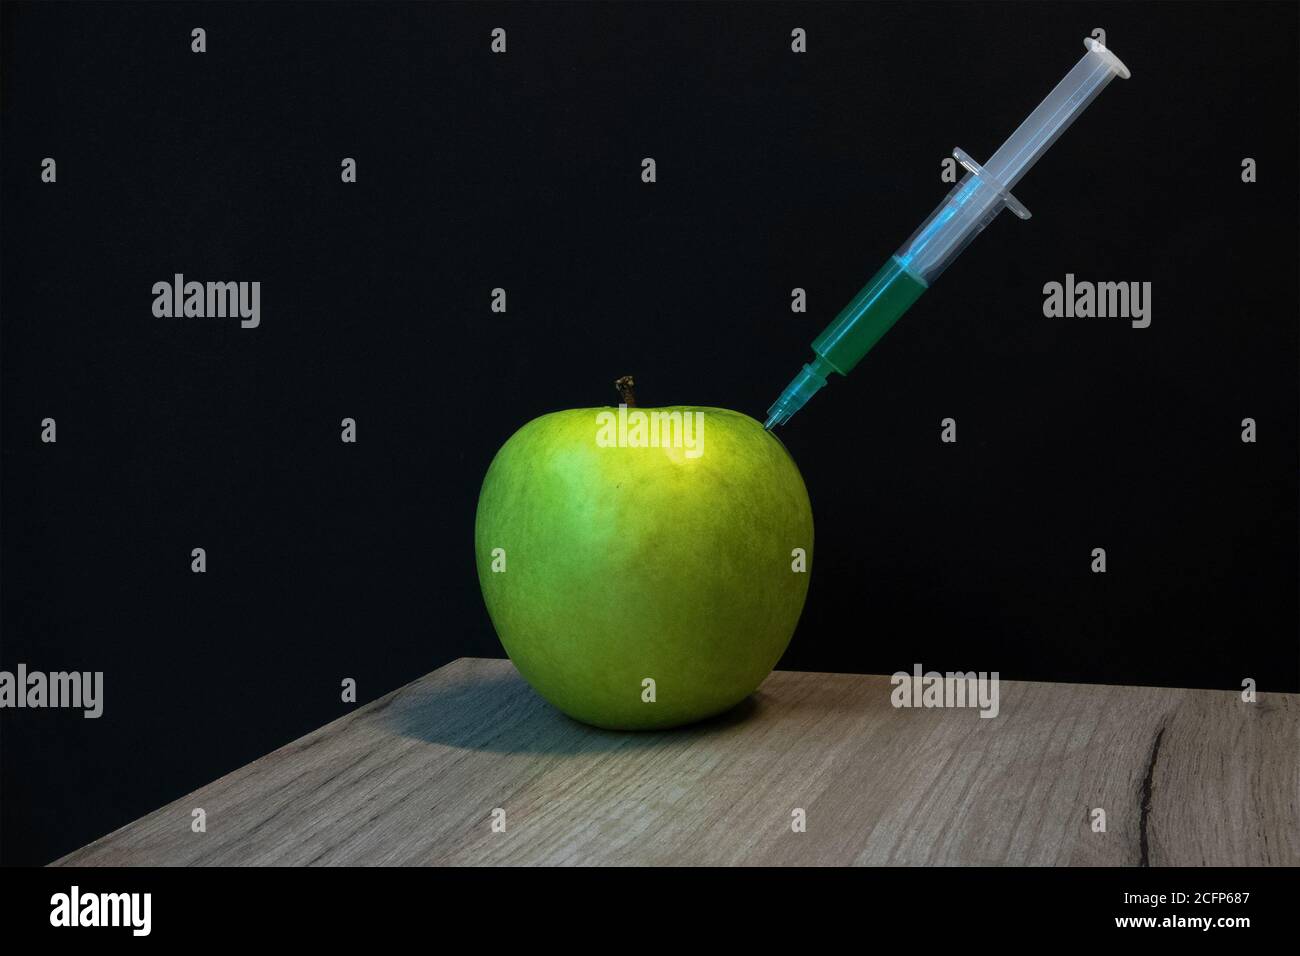 Green apple on a wooden board and syringe inside it extracting green liquid Stock Photo